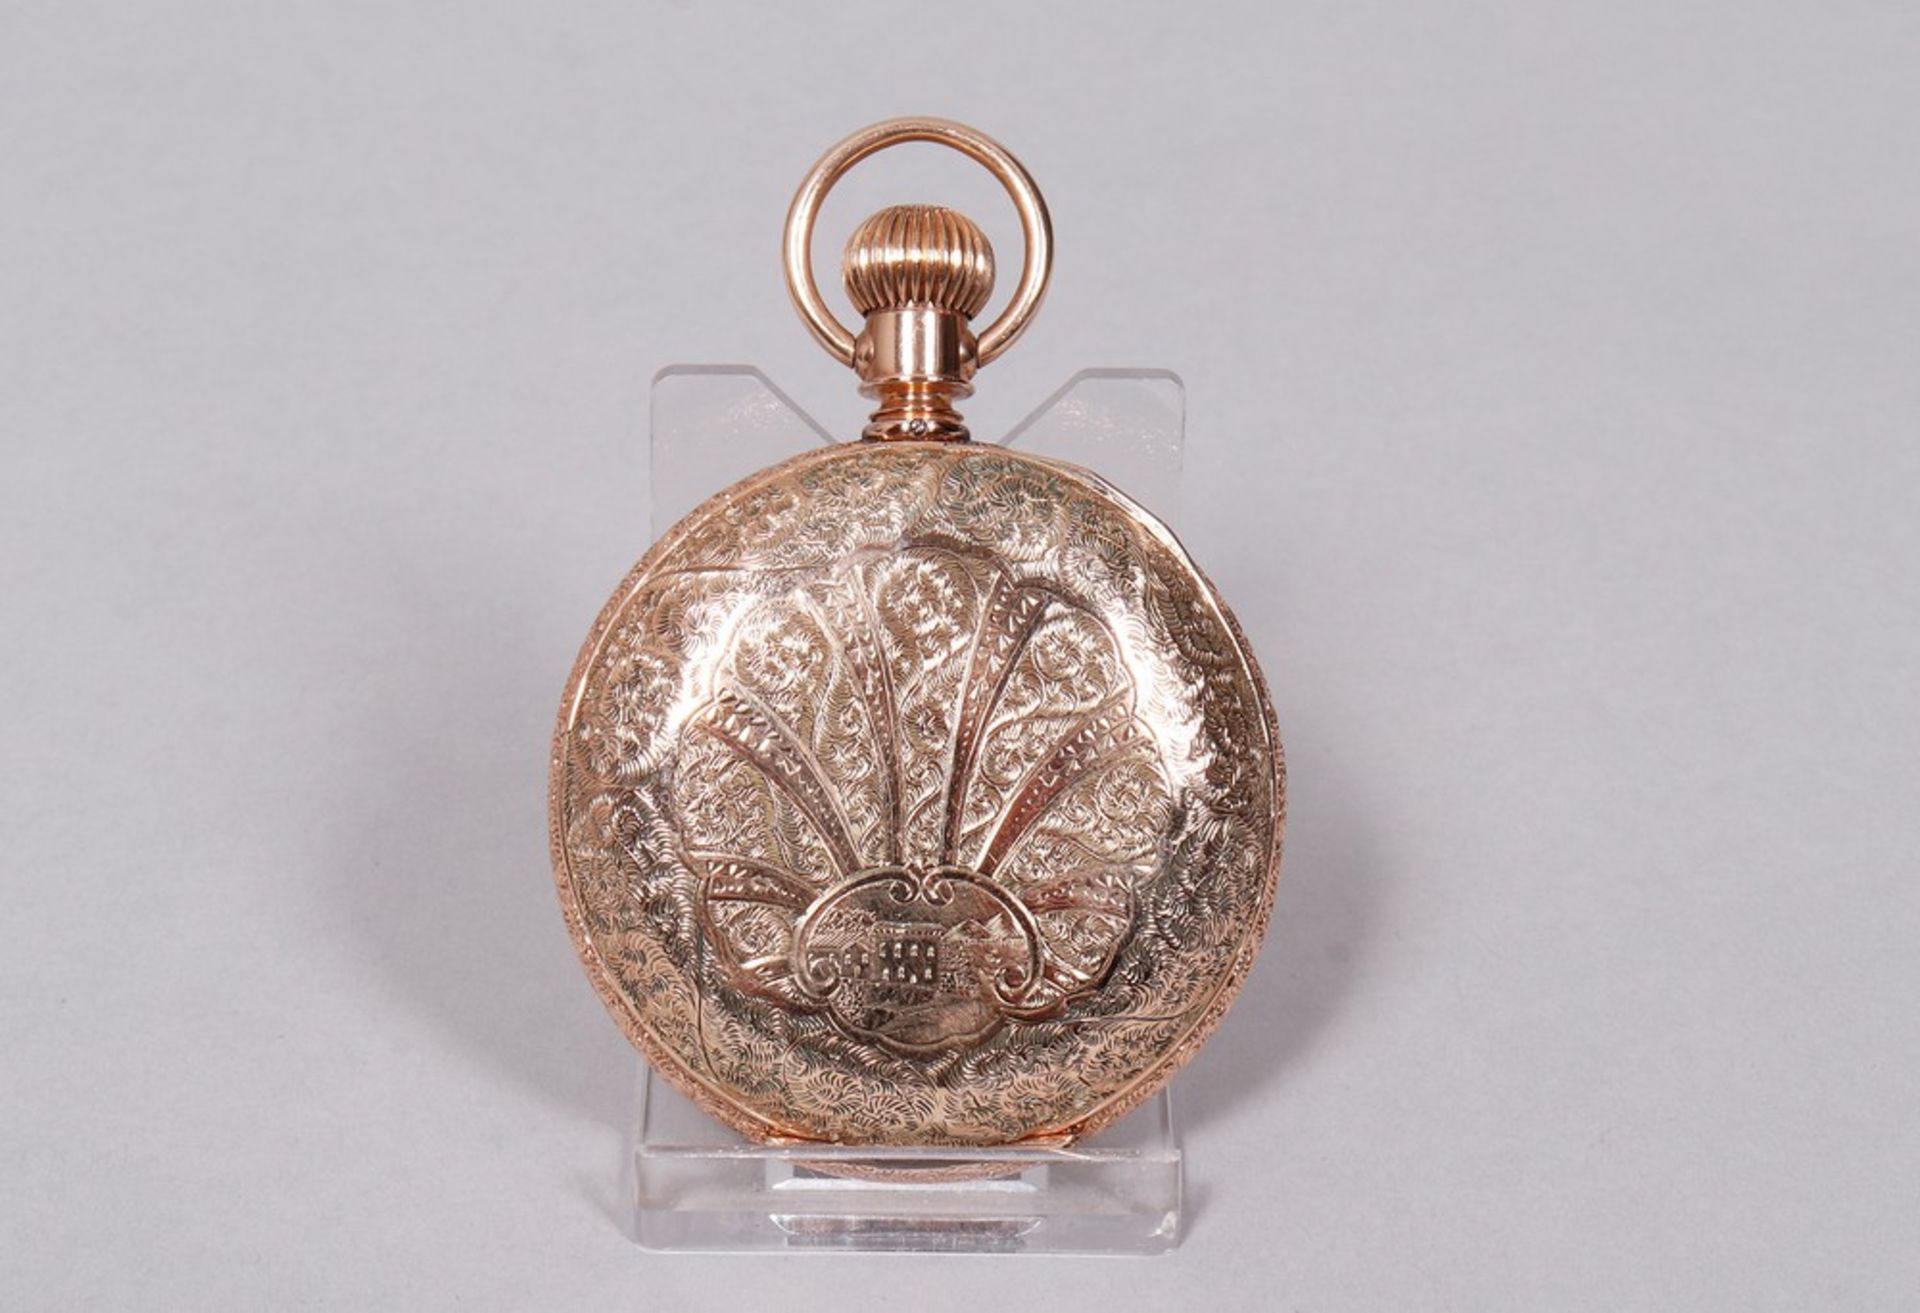 Very rare American pocket watch from 1894, Seth Thomas, Thomaston, Conn., made of 585 gold - Image 5 of 8